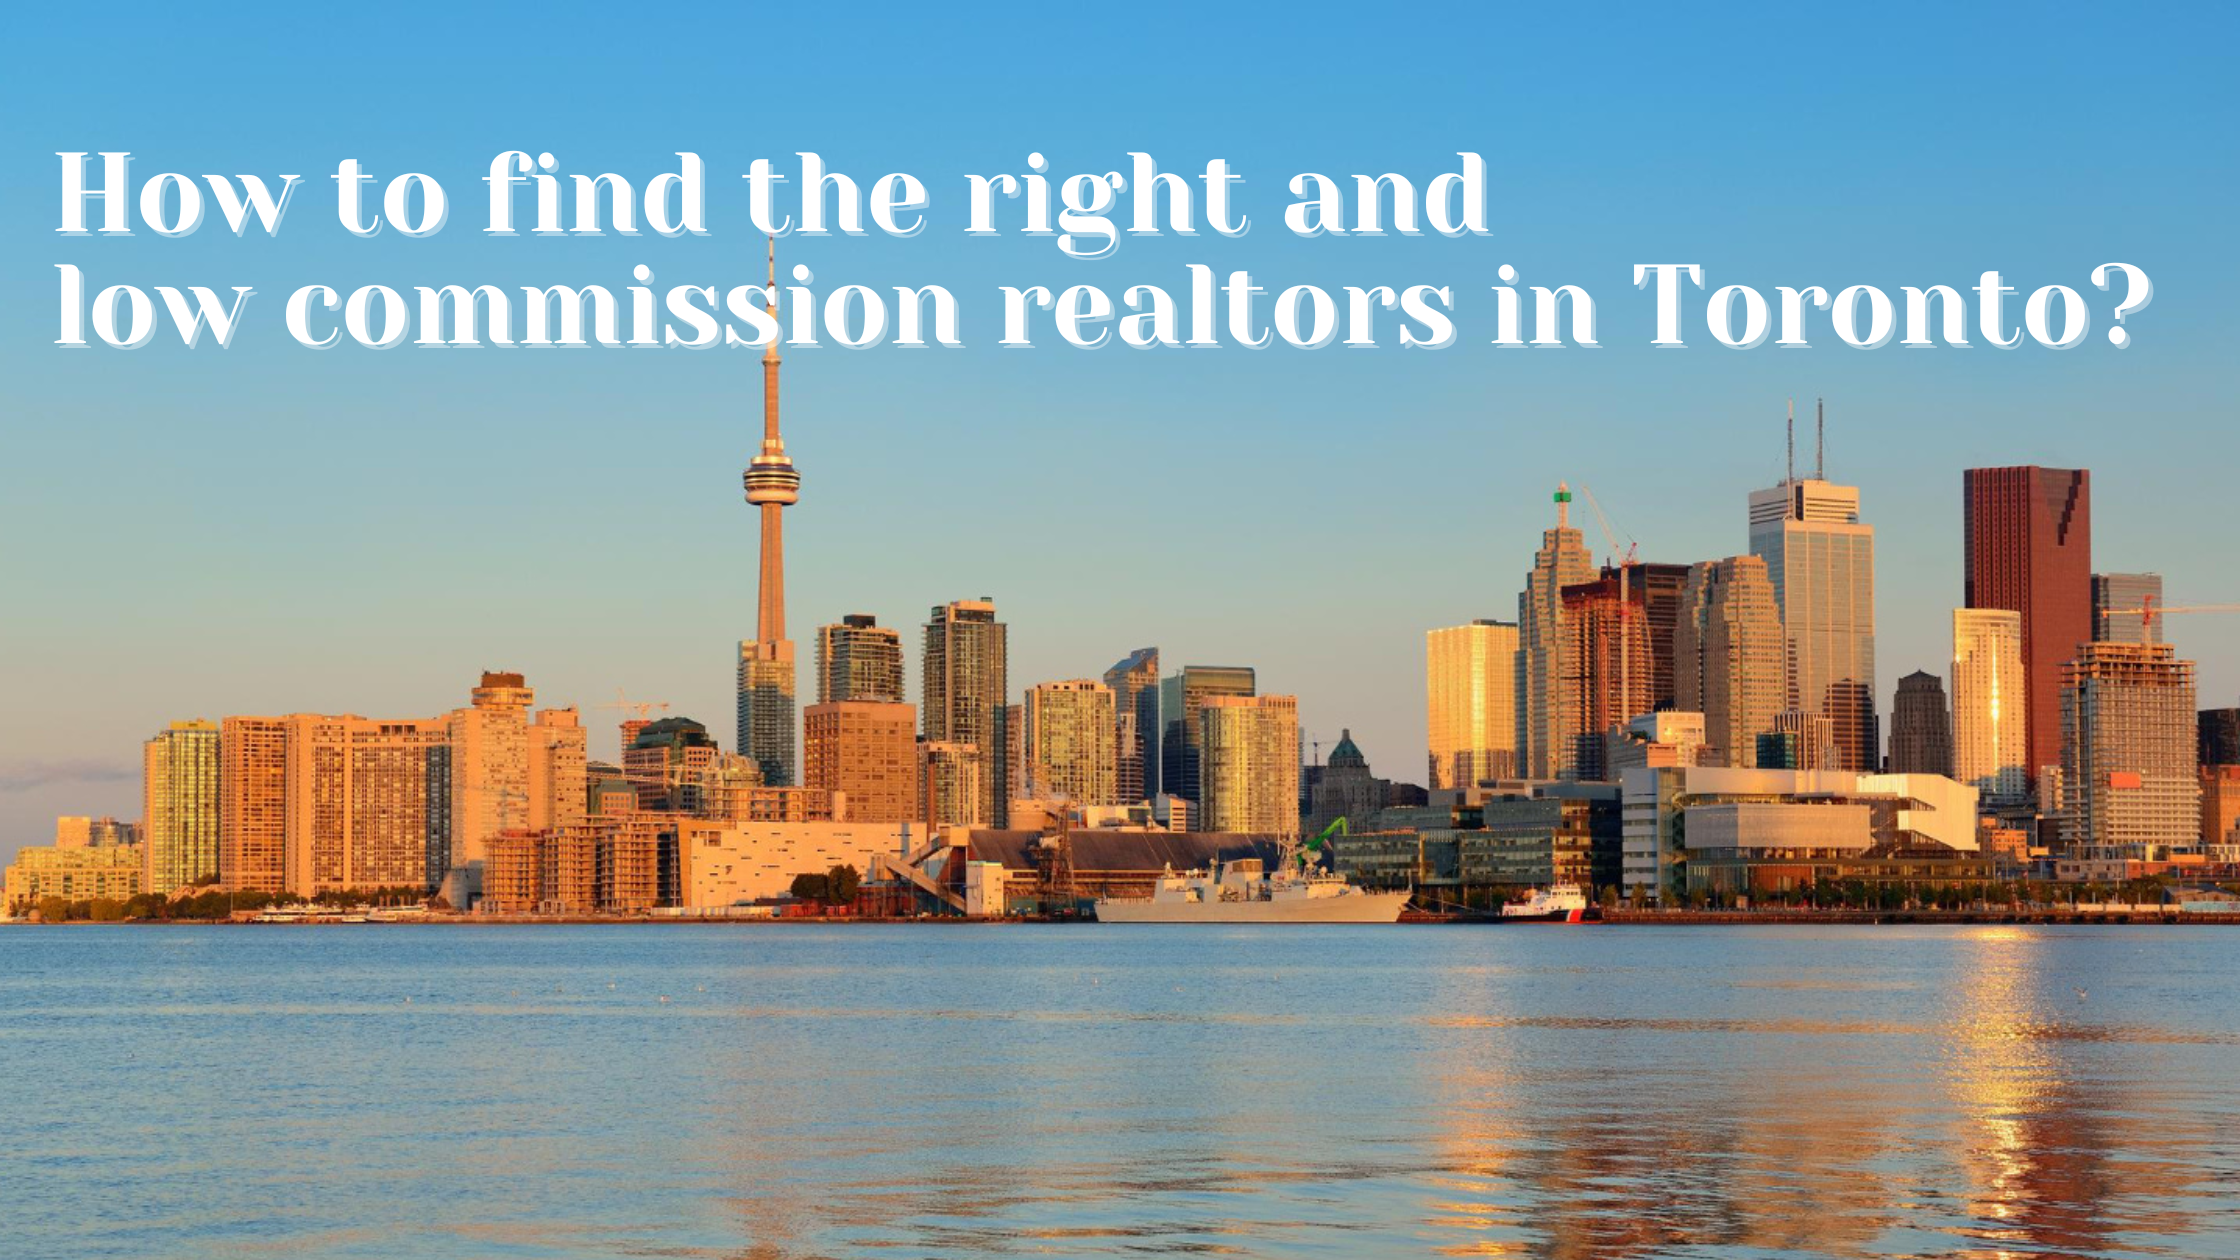 How to find the right and low commission realtors in Toronto?